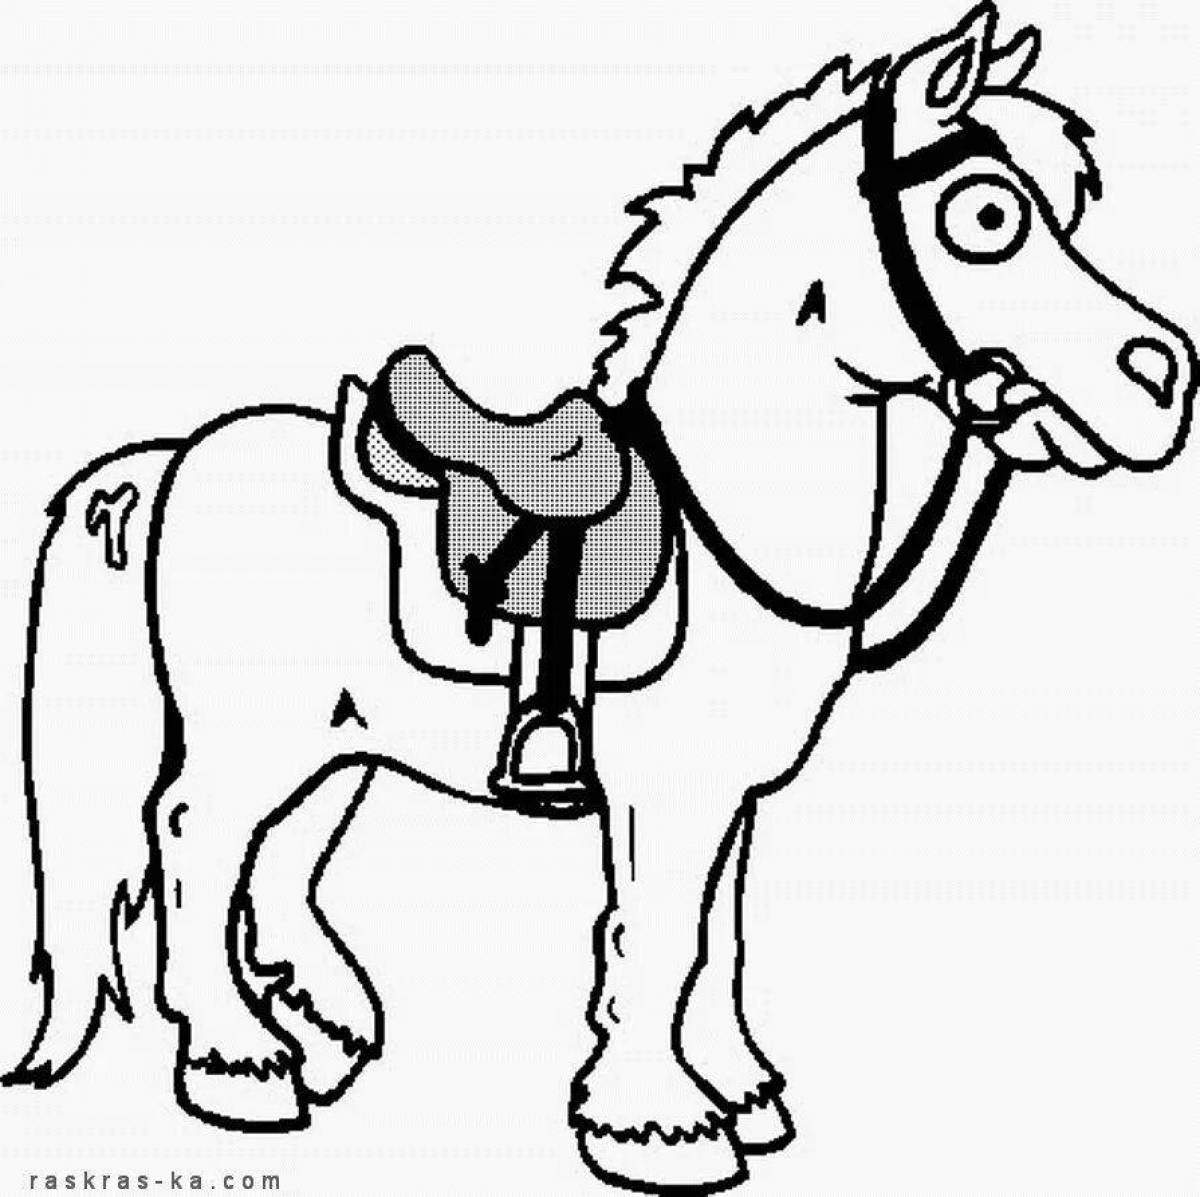 Majestic shire horse coloring book for kids